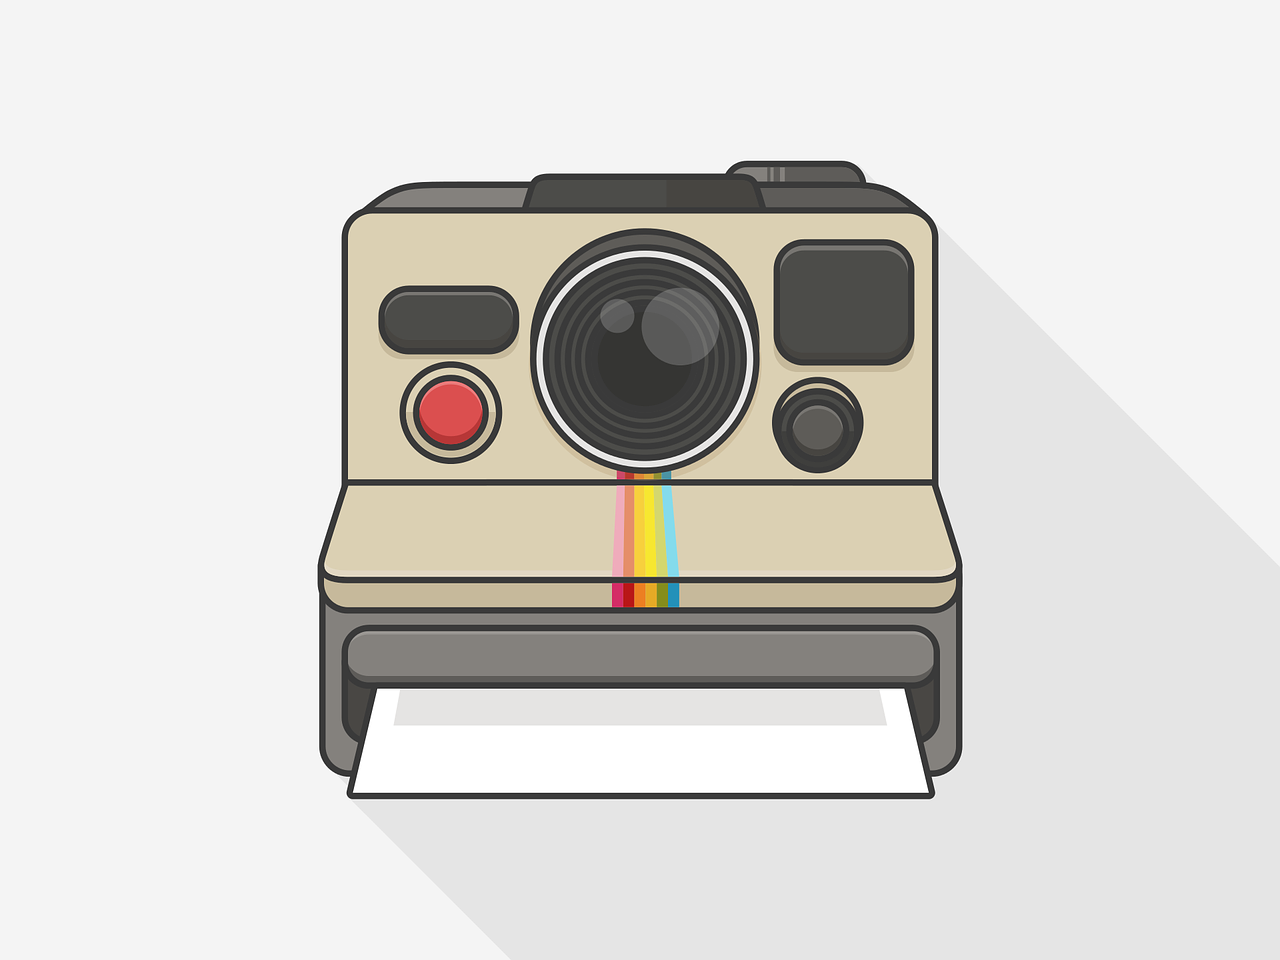 A polaroid camera representing Instagram, posted to: "5 Instagram Marketing Tips for Small Businesses"